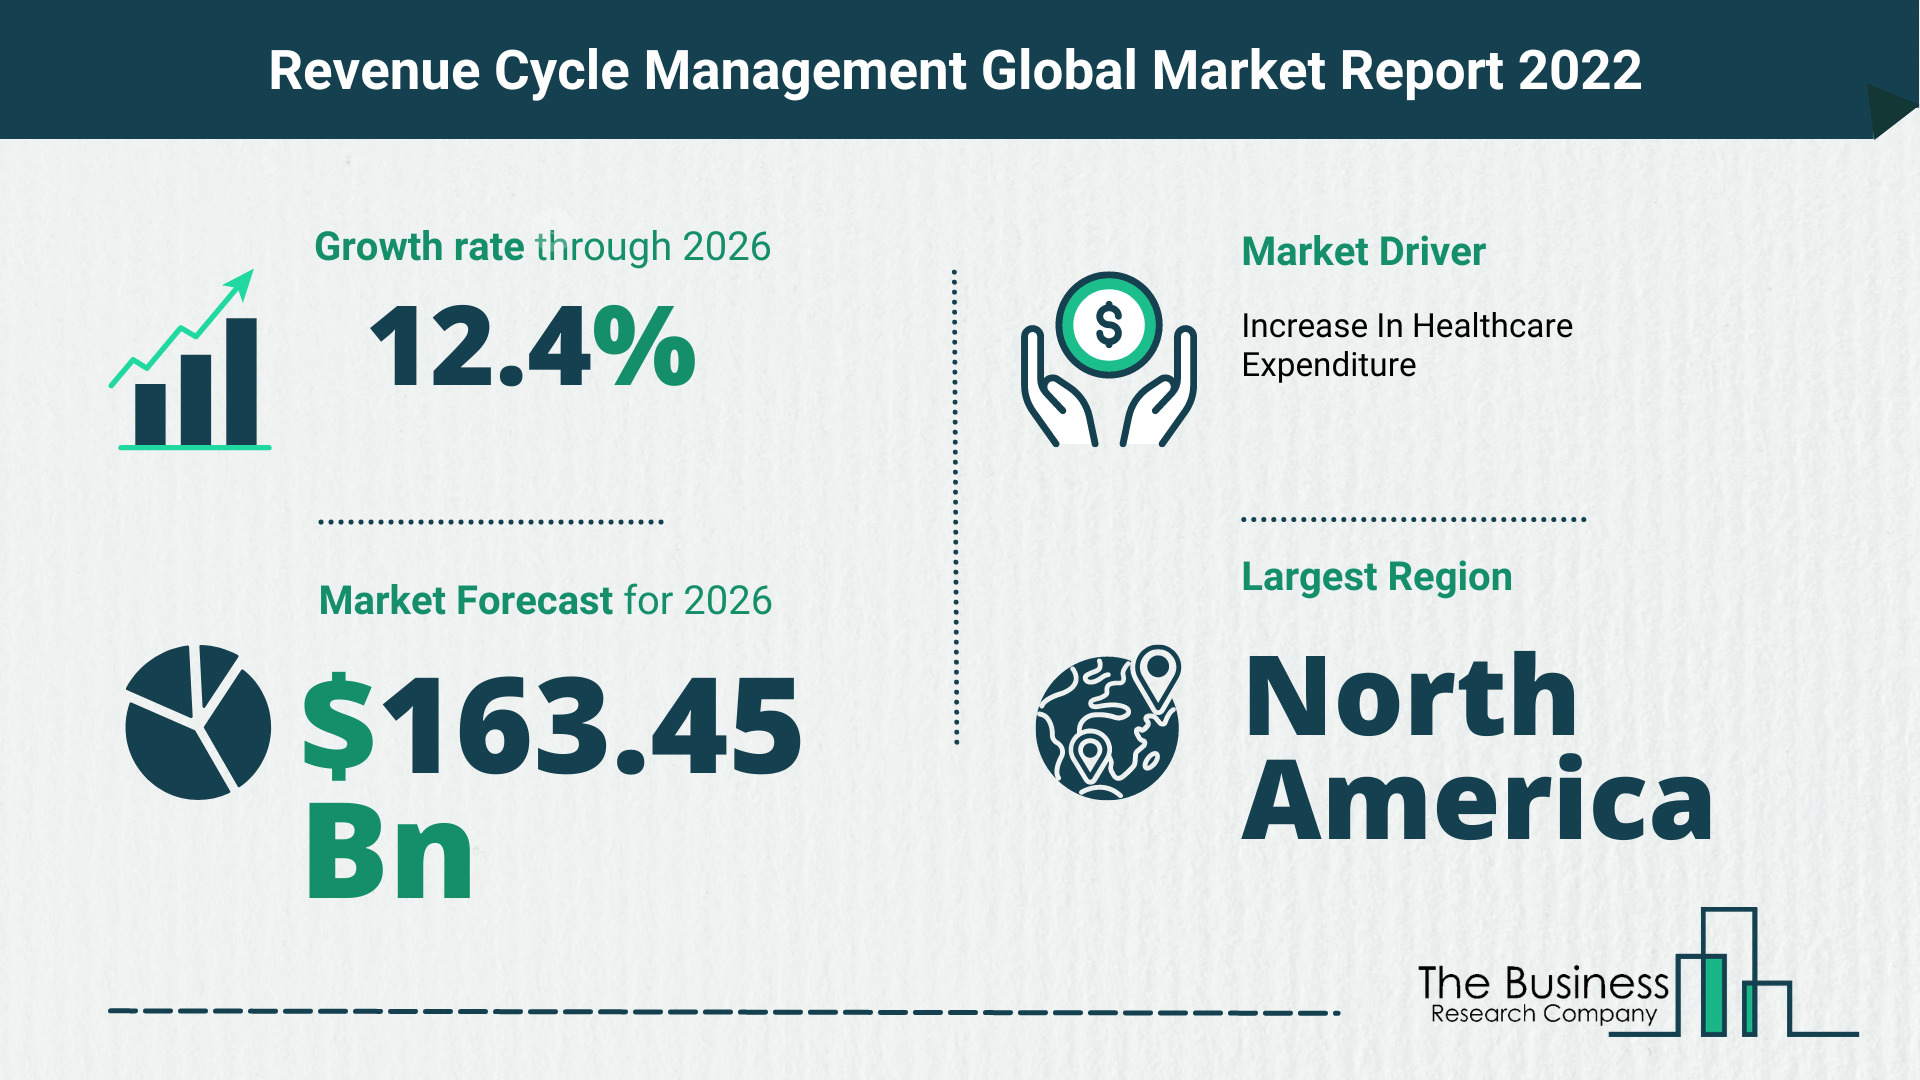 How Will The Revenue Cycle Management (RCM) Market Grow In 2022?